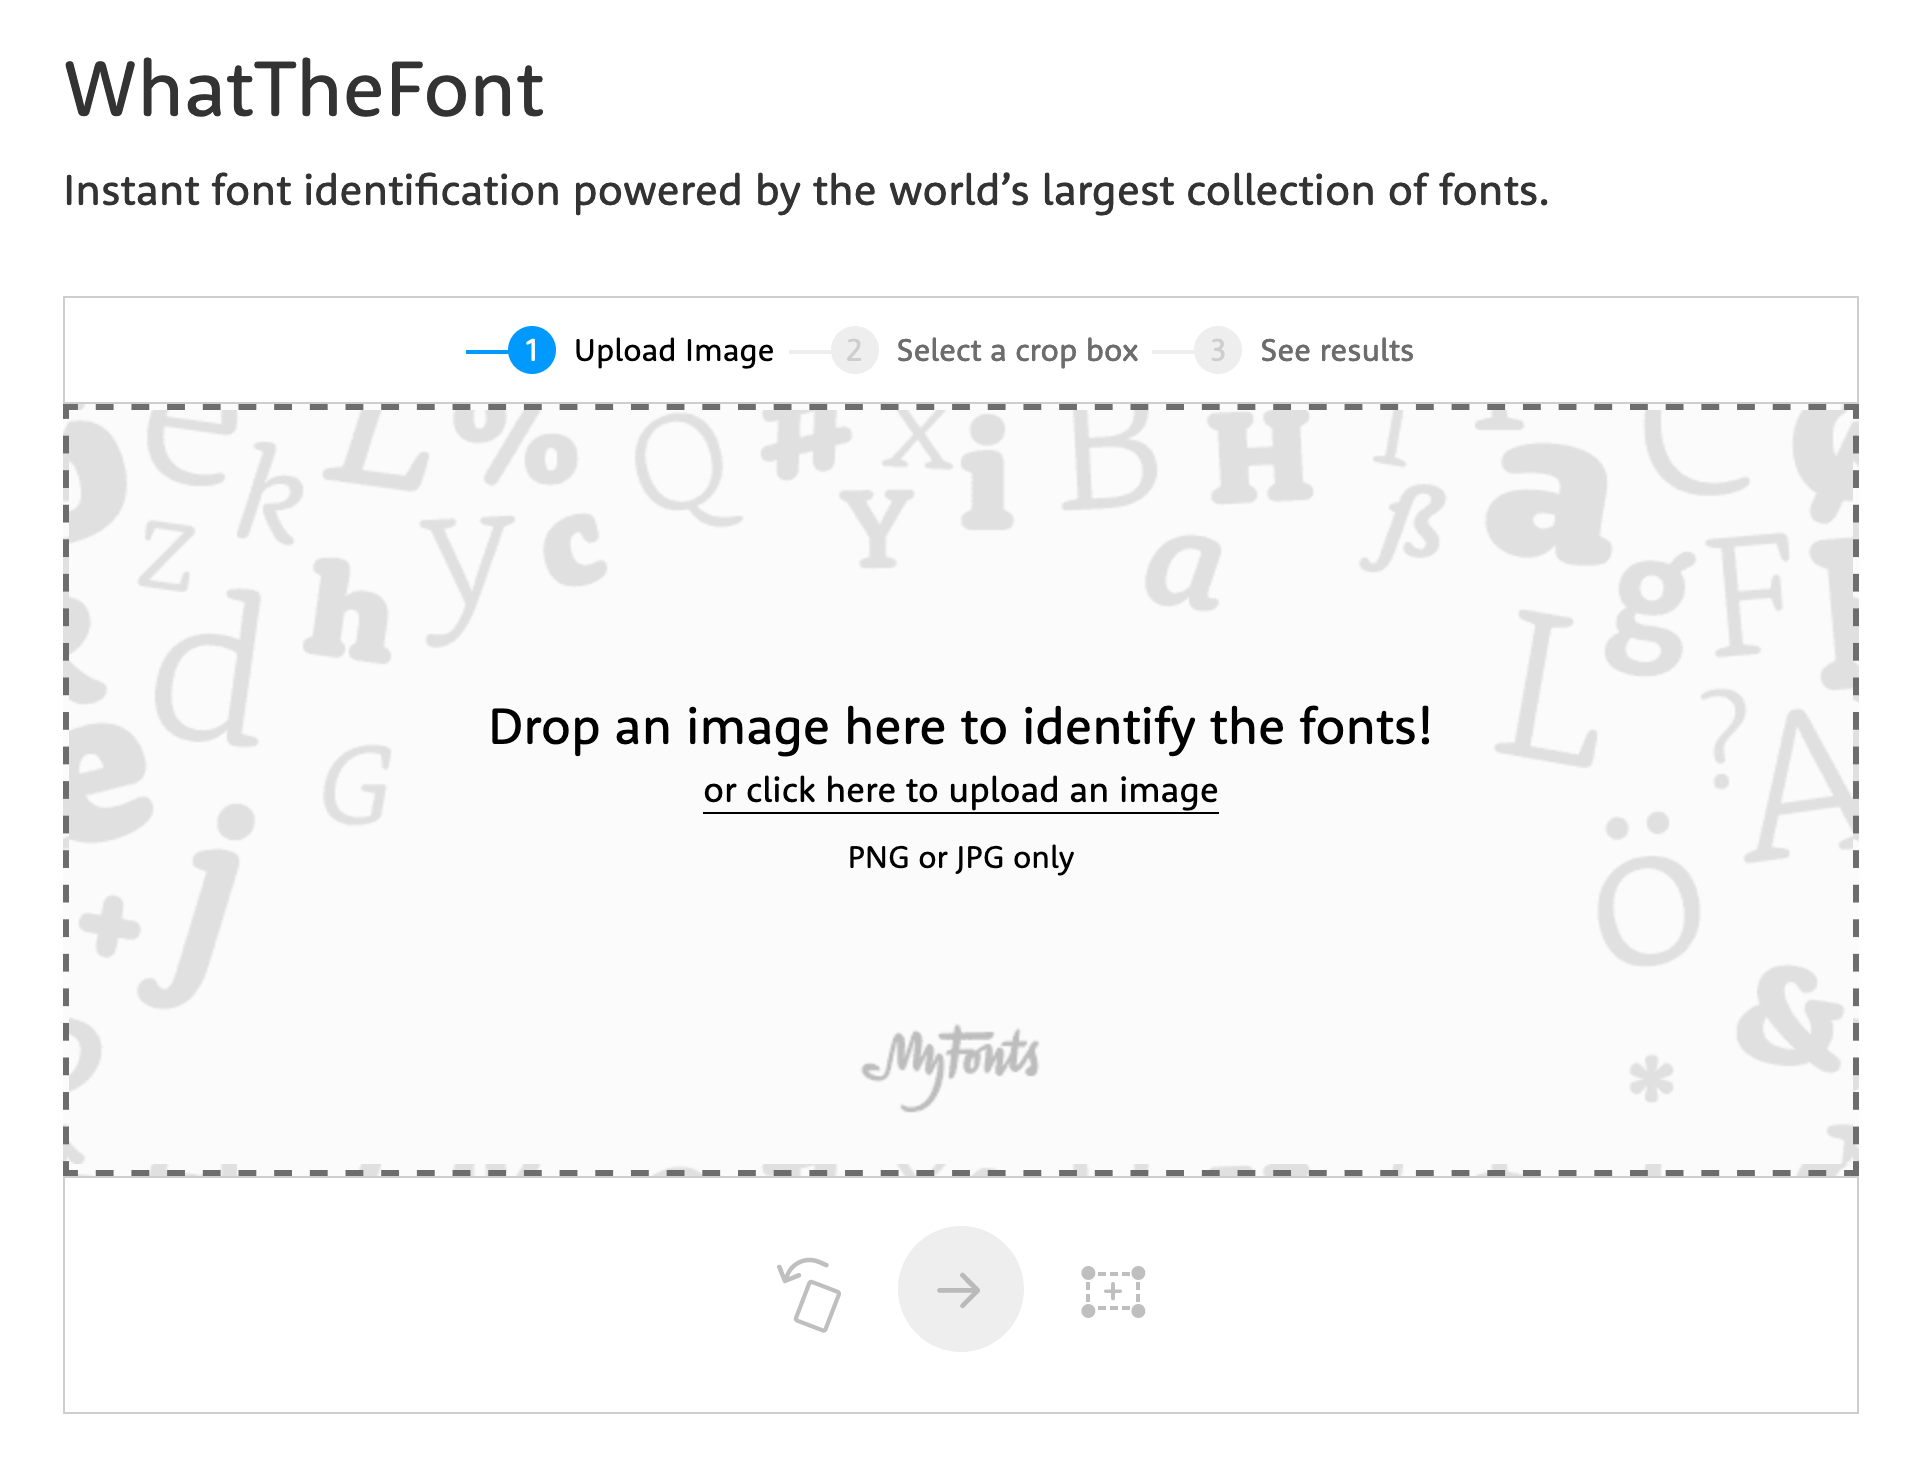 WhatTheFont interface. Upload an image and learn what fonts it includes.